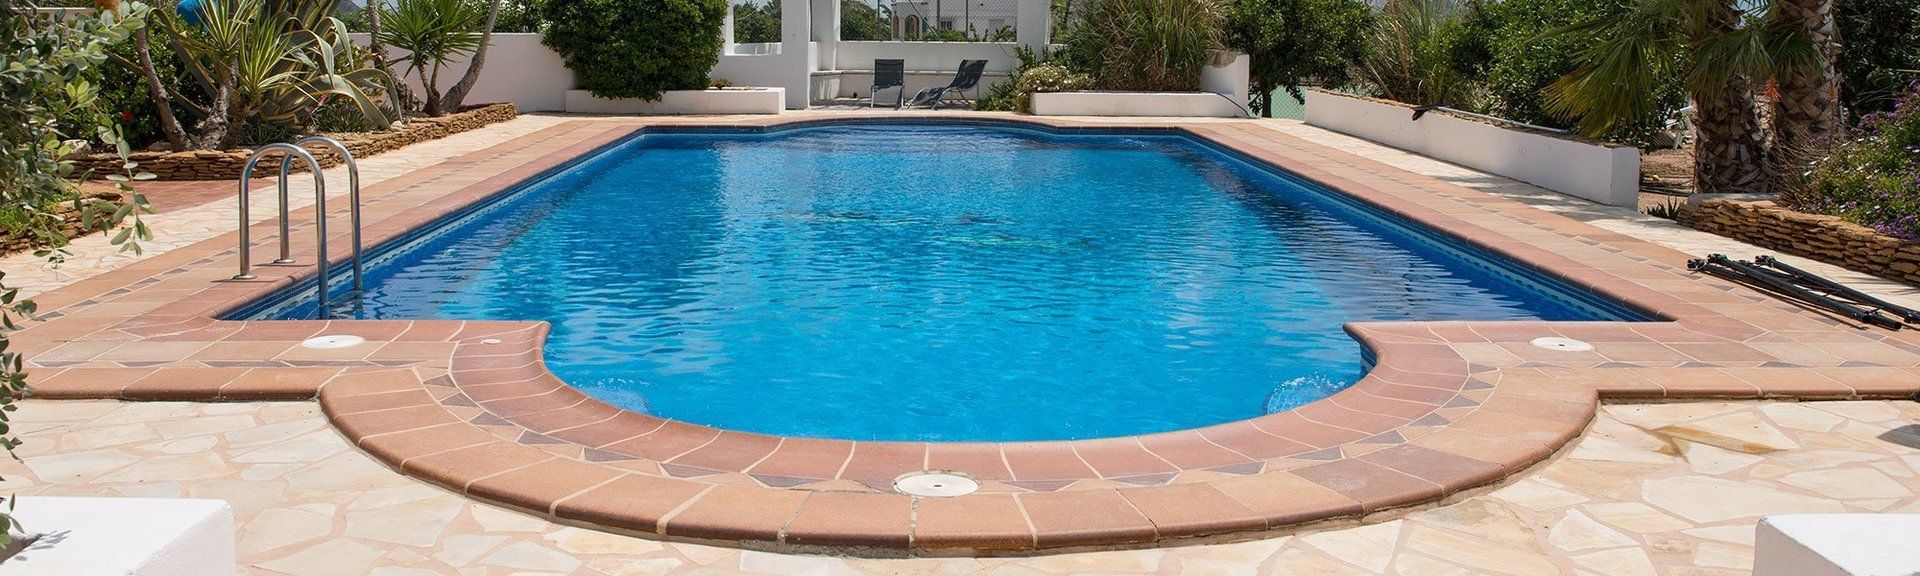 Pool Maintenance and Repair Services